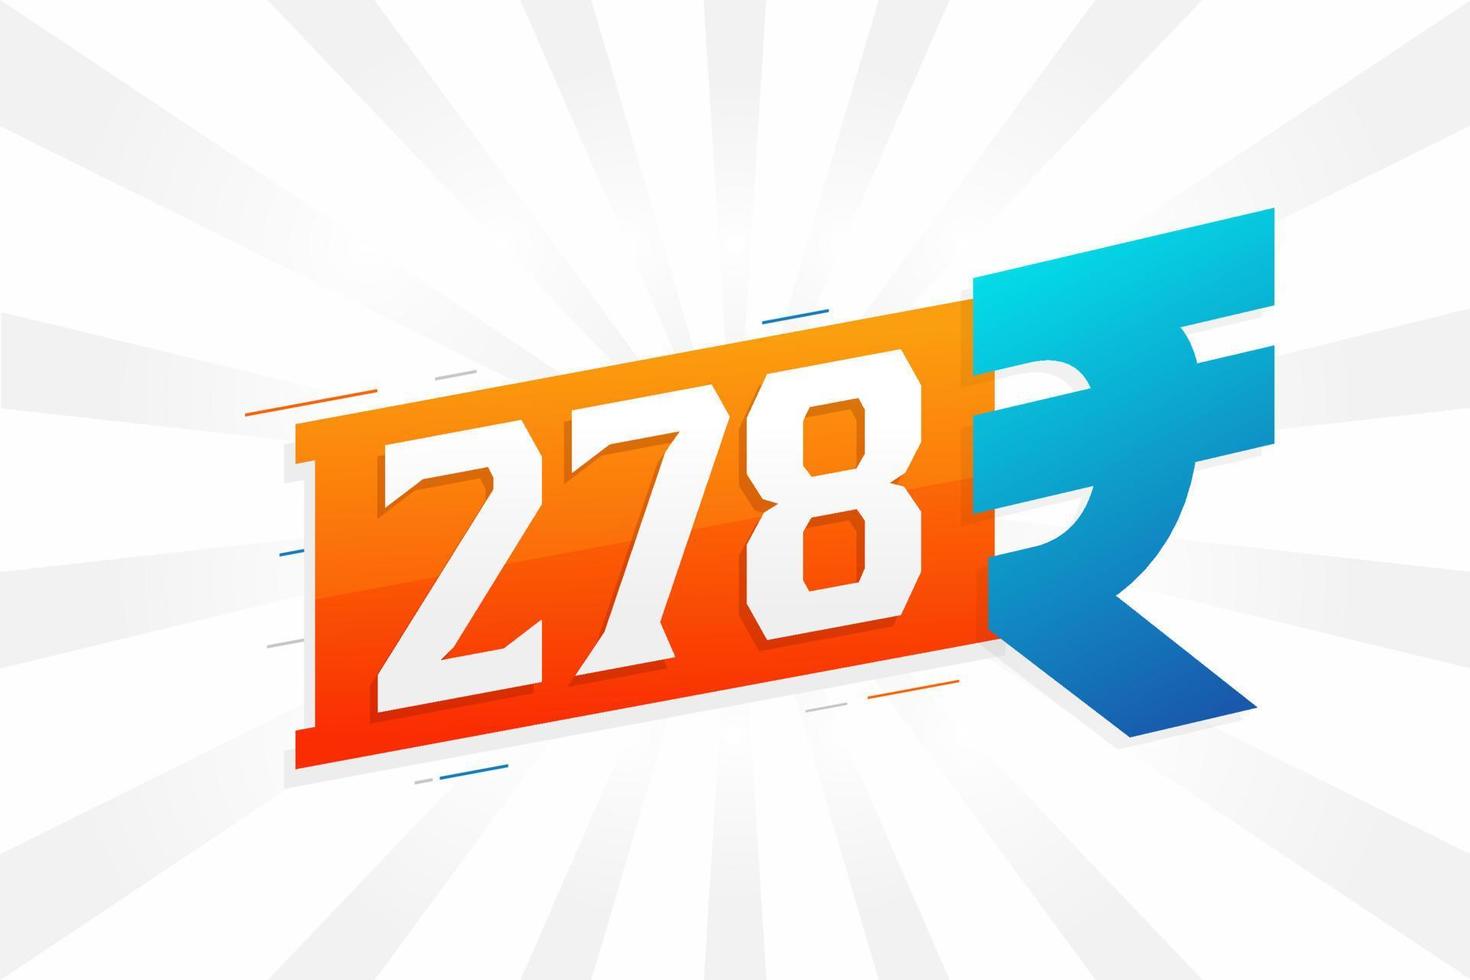 278 Rupee symbol bold text vector image. 278 Indian Rupee currency sign vector illustration